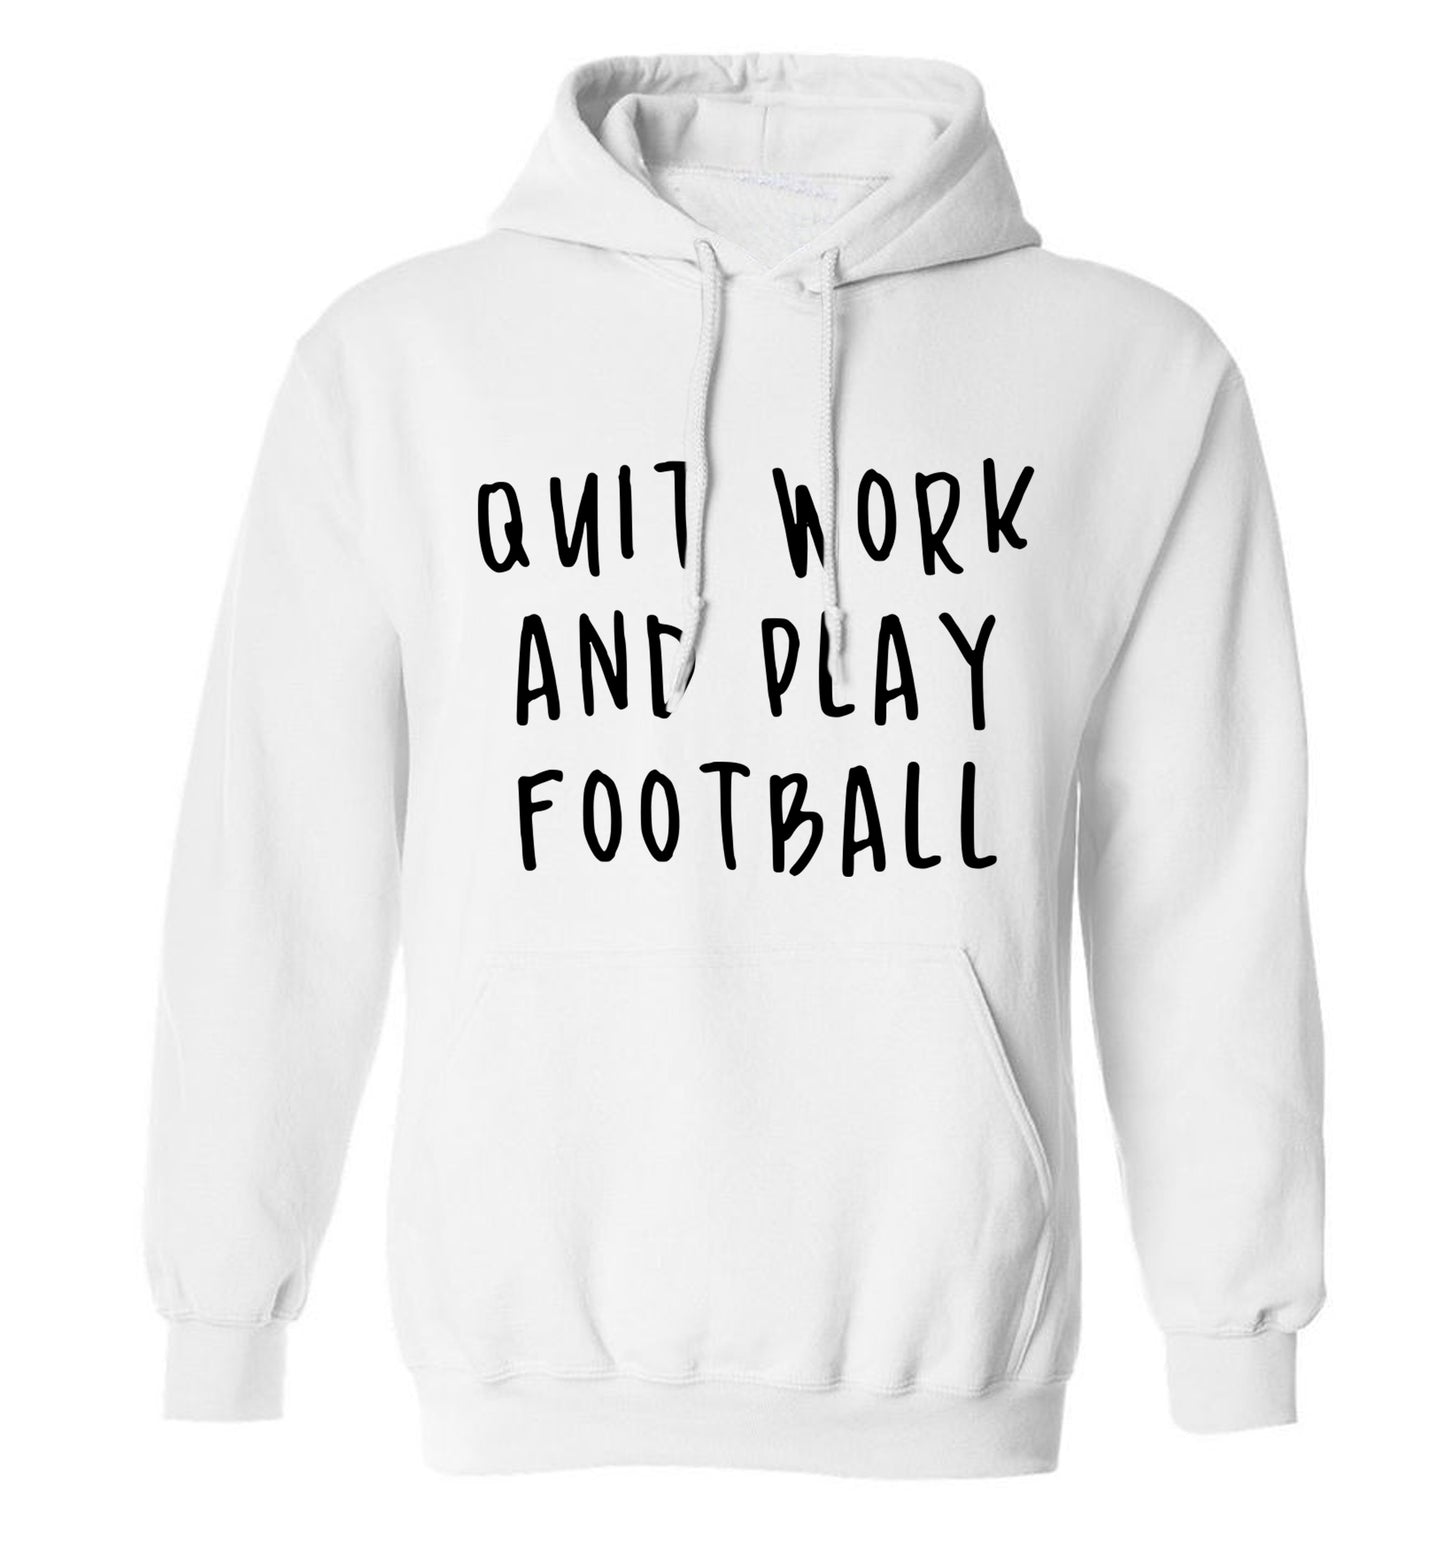 Quit work play football adults unisexwhite hoodie 2XL